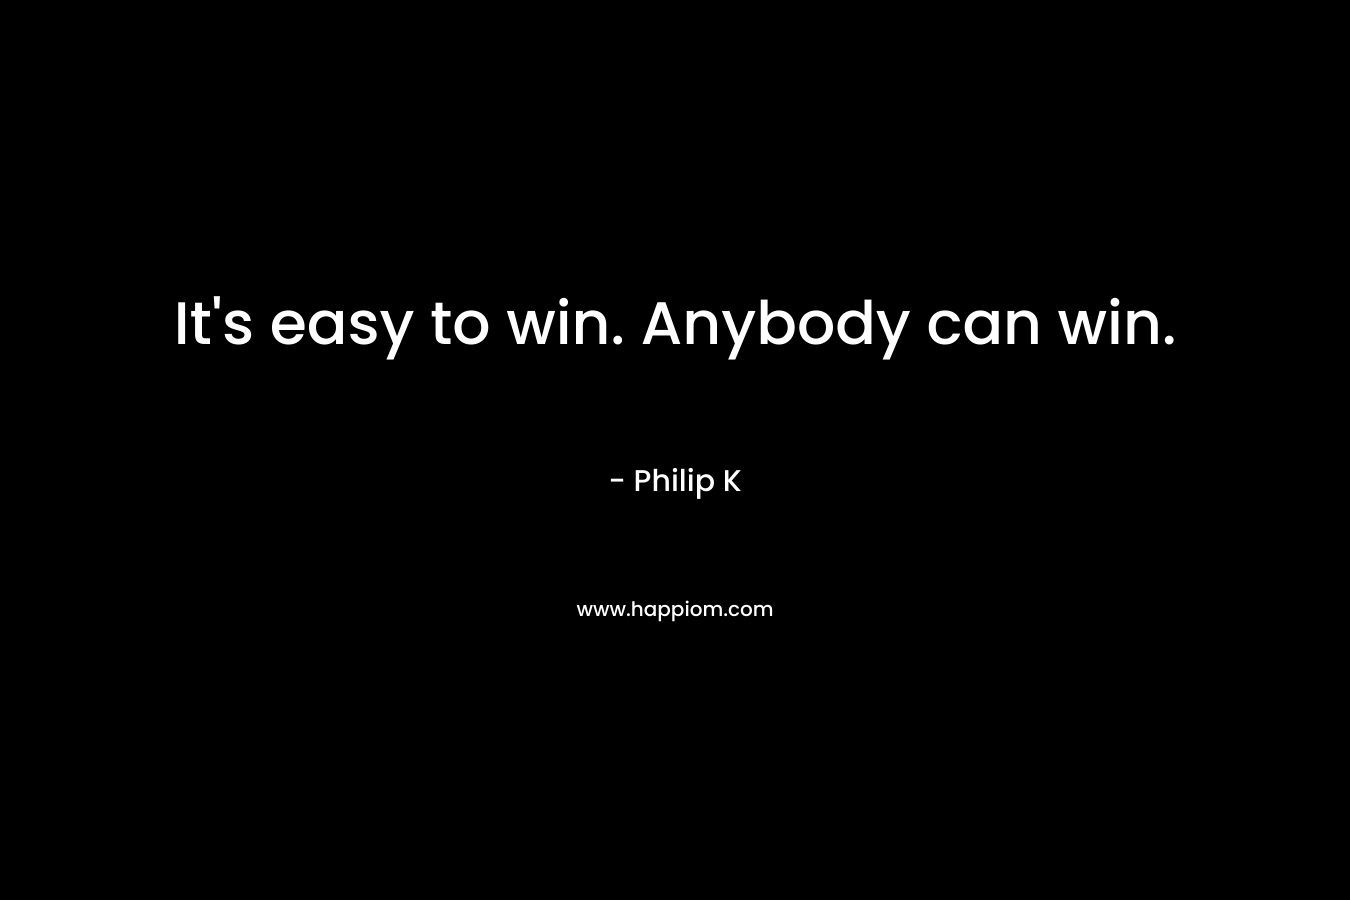 It's easy to win. Anybody can win.